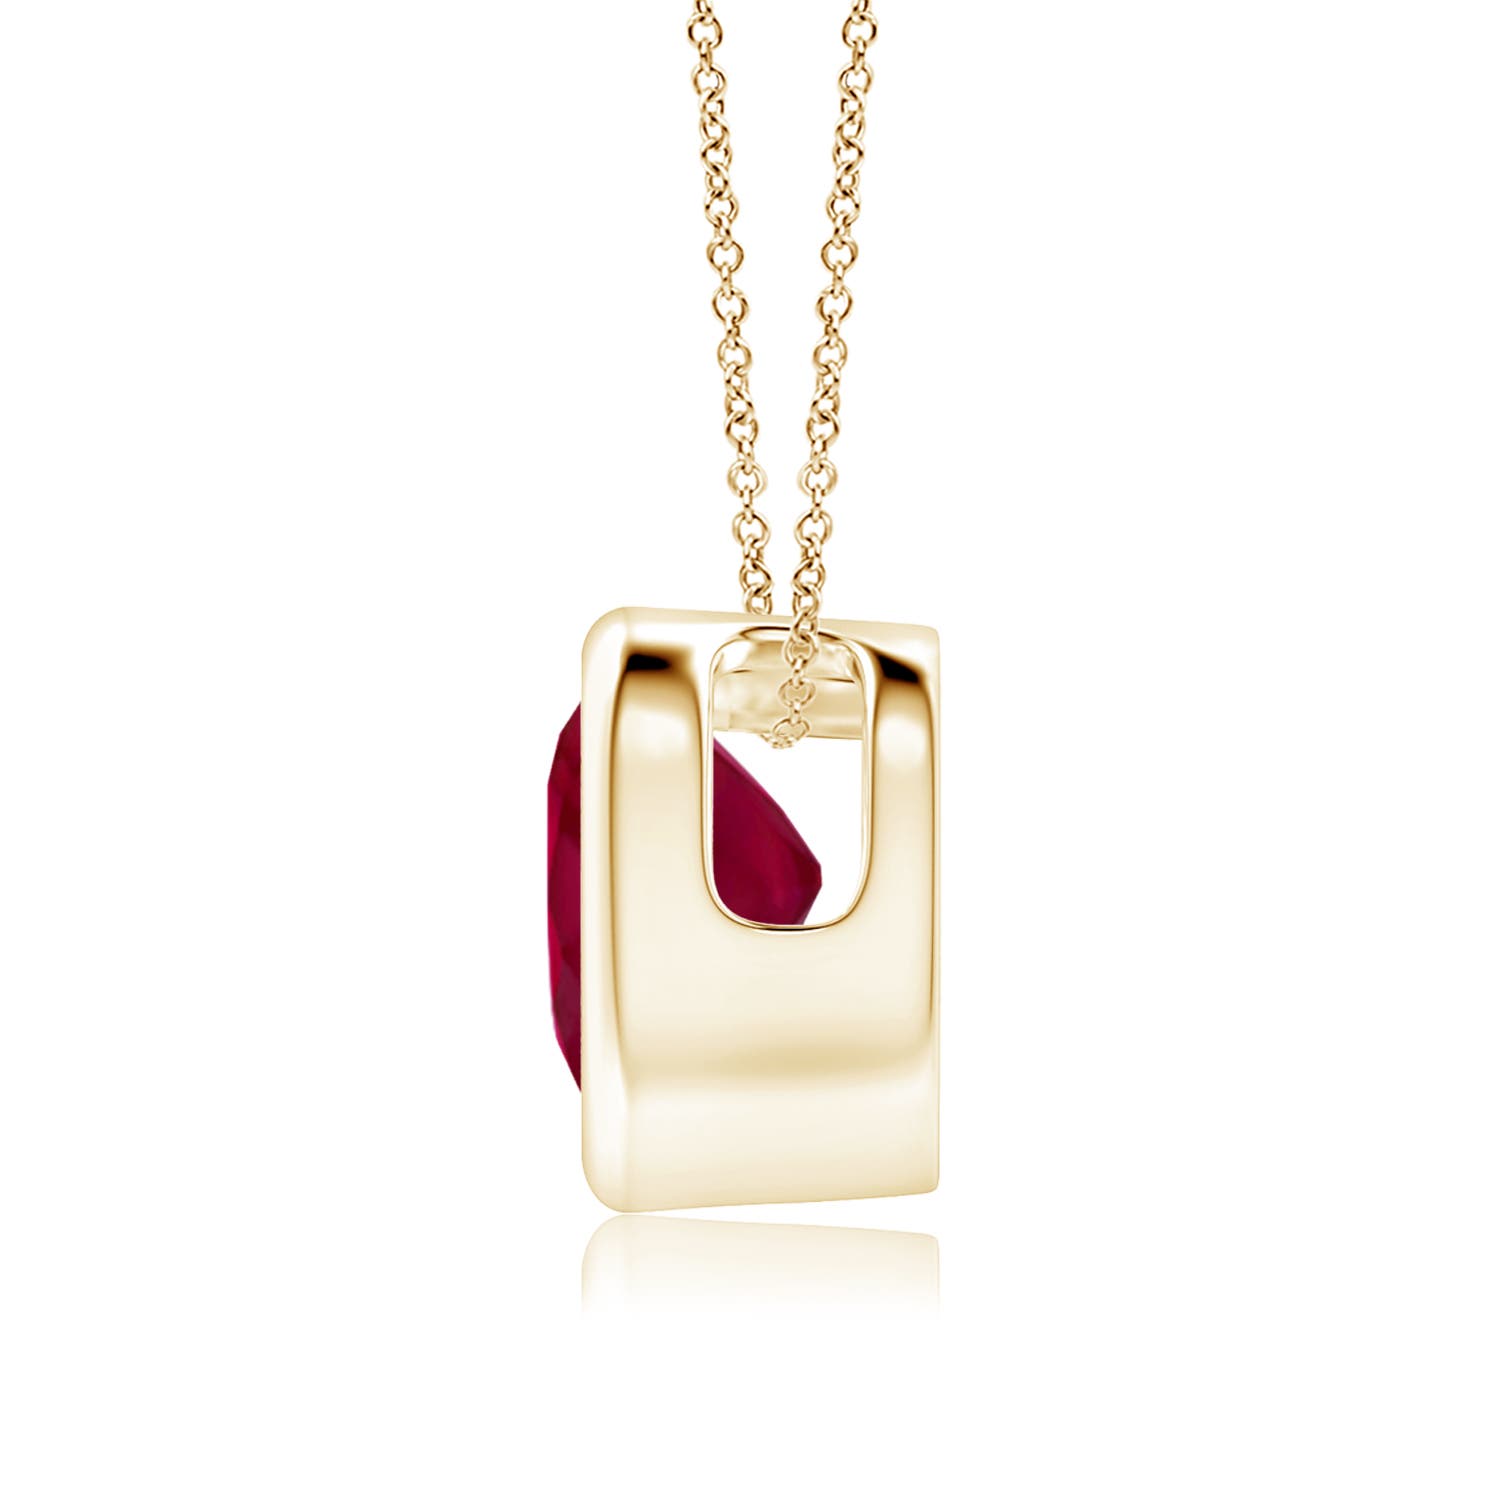 A - Ruby / 0.8 CT / 14 KT Yellow Gold